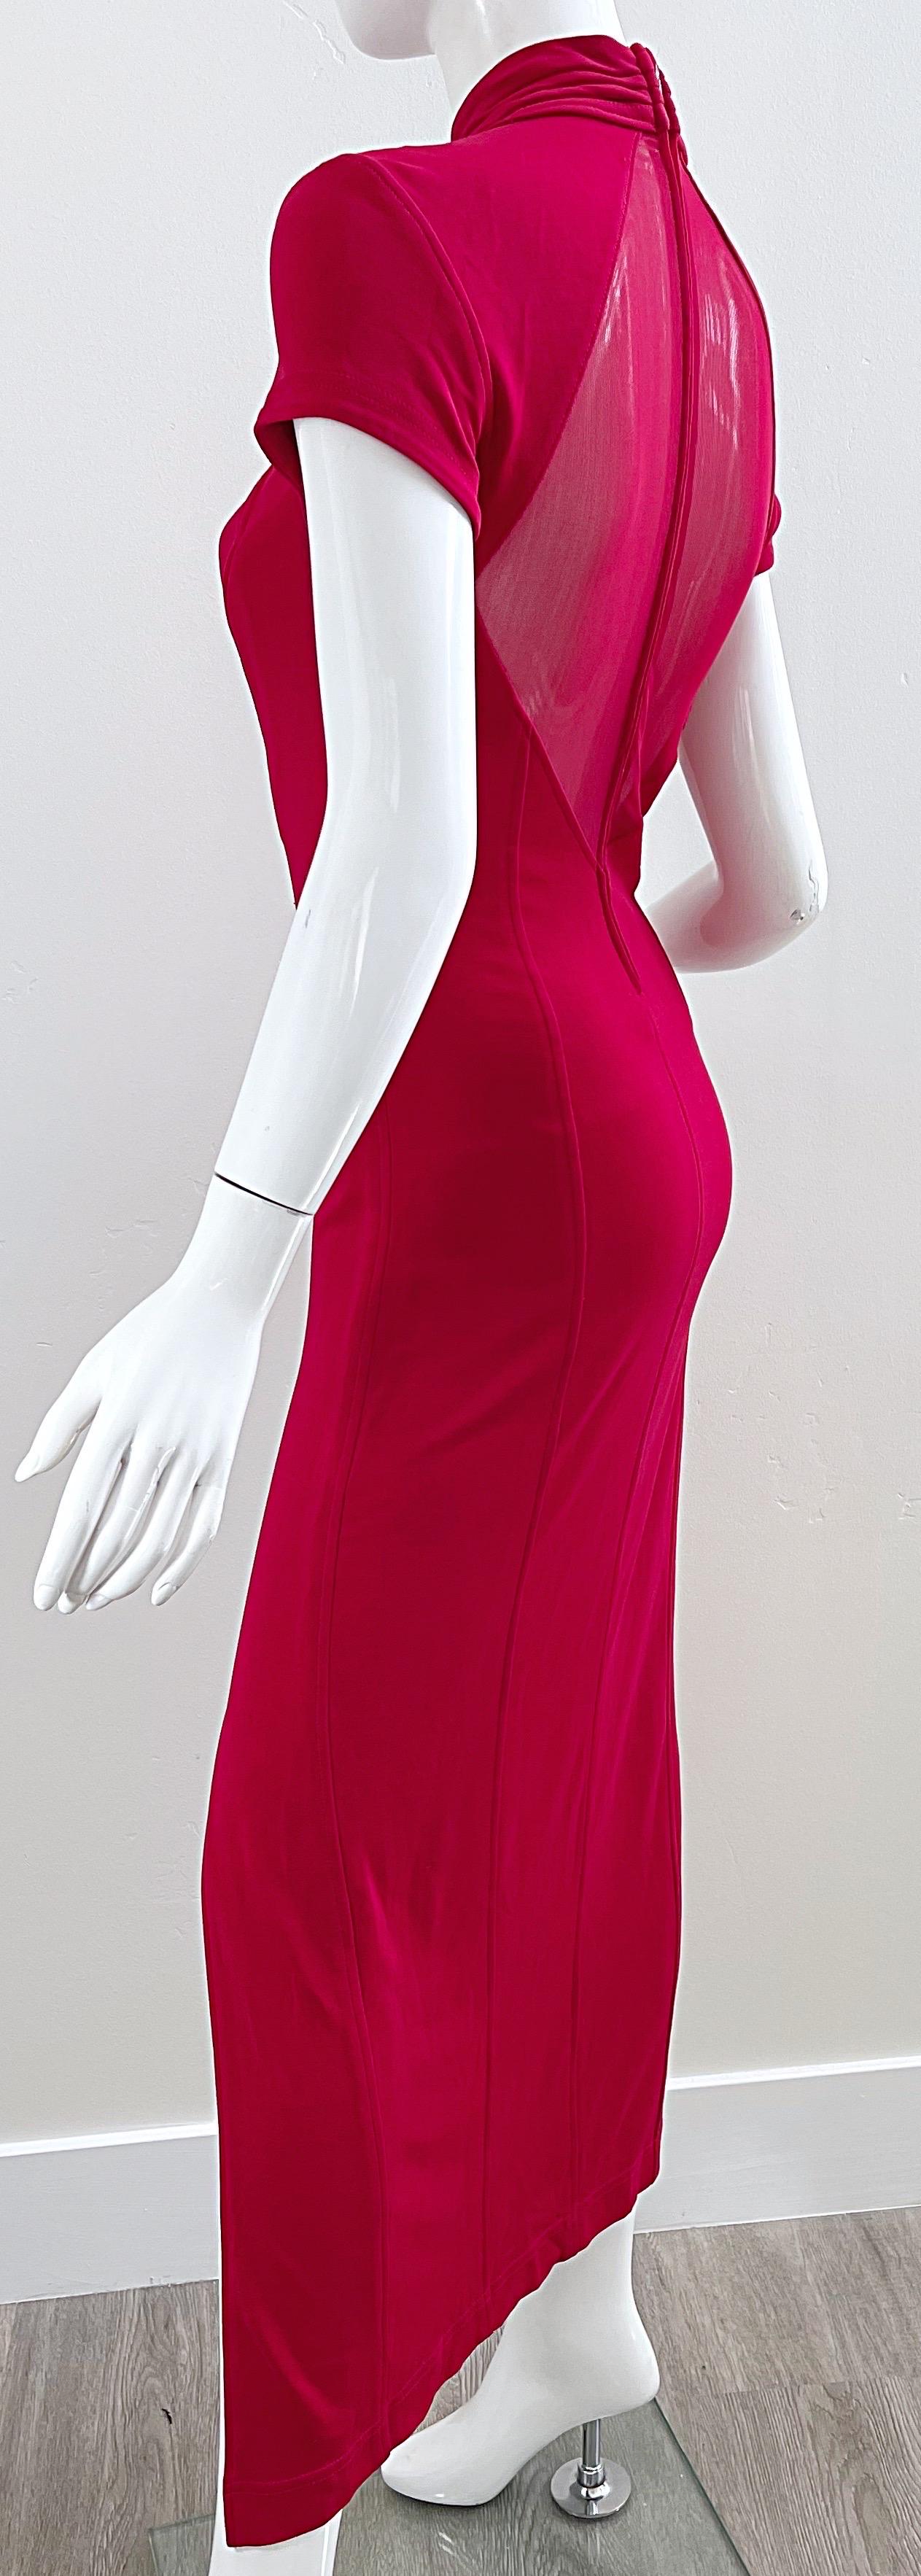 1990s Tadashi Lipstick Red Sexy Cut-Out Bodycon Vintage 90s Jersey Evening Dress For Sale 2